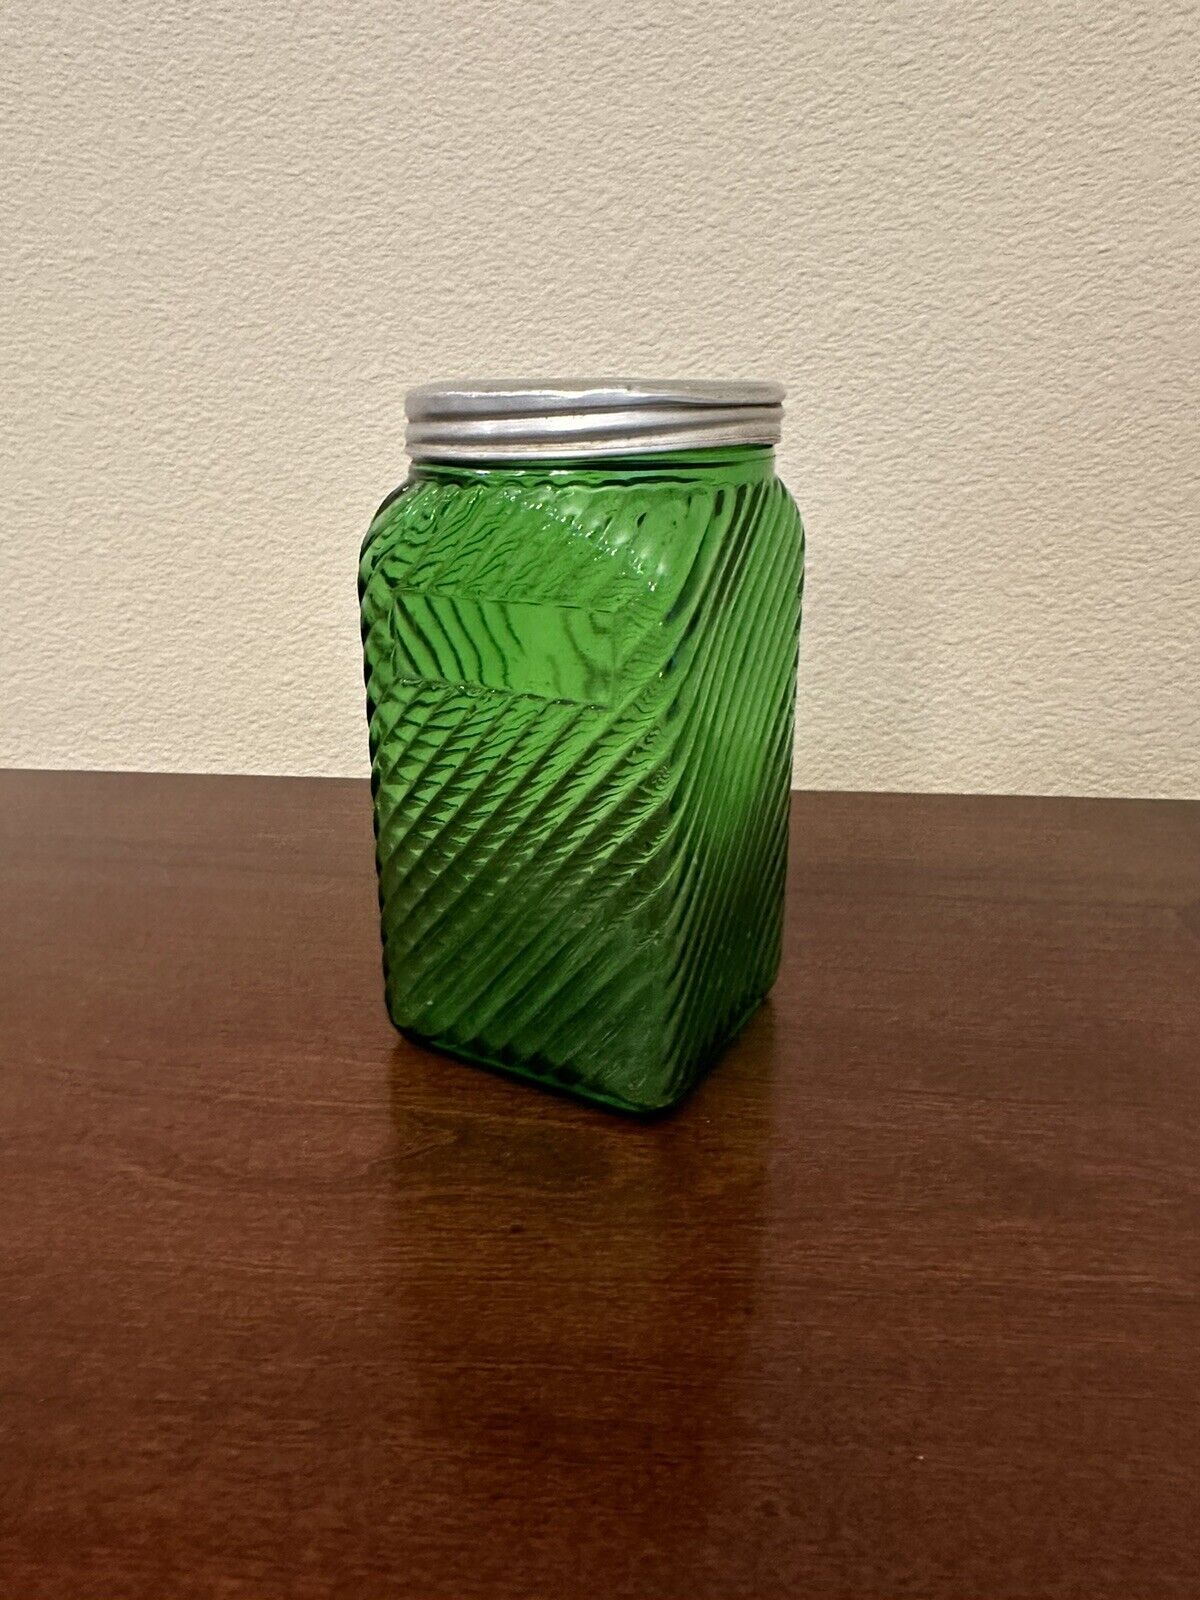 Vintage Owens Illinois Glass Green Hoosier Depression Ribbed Canister 